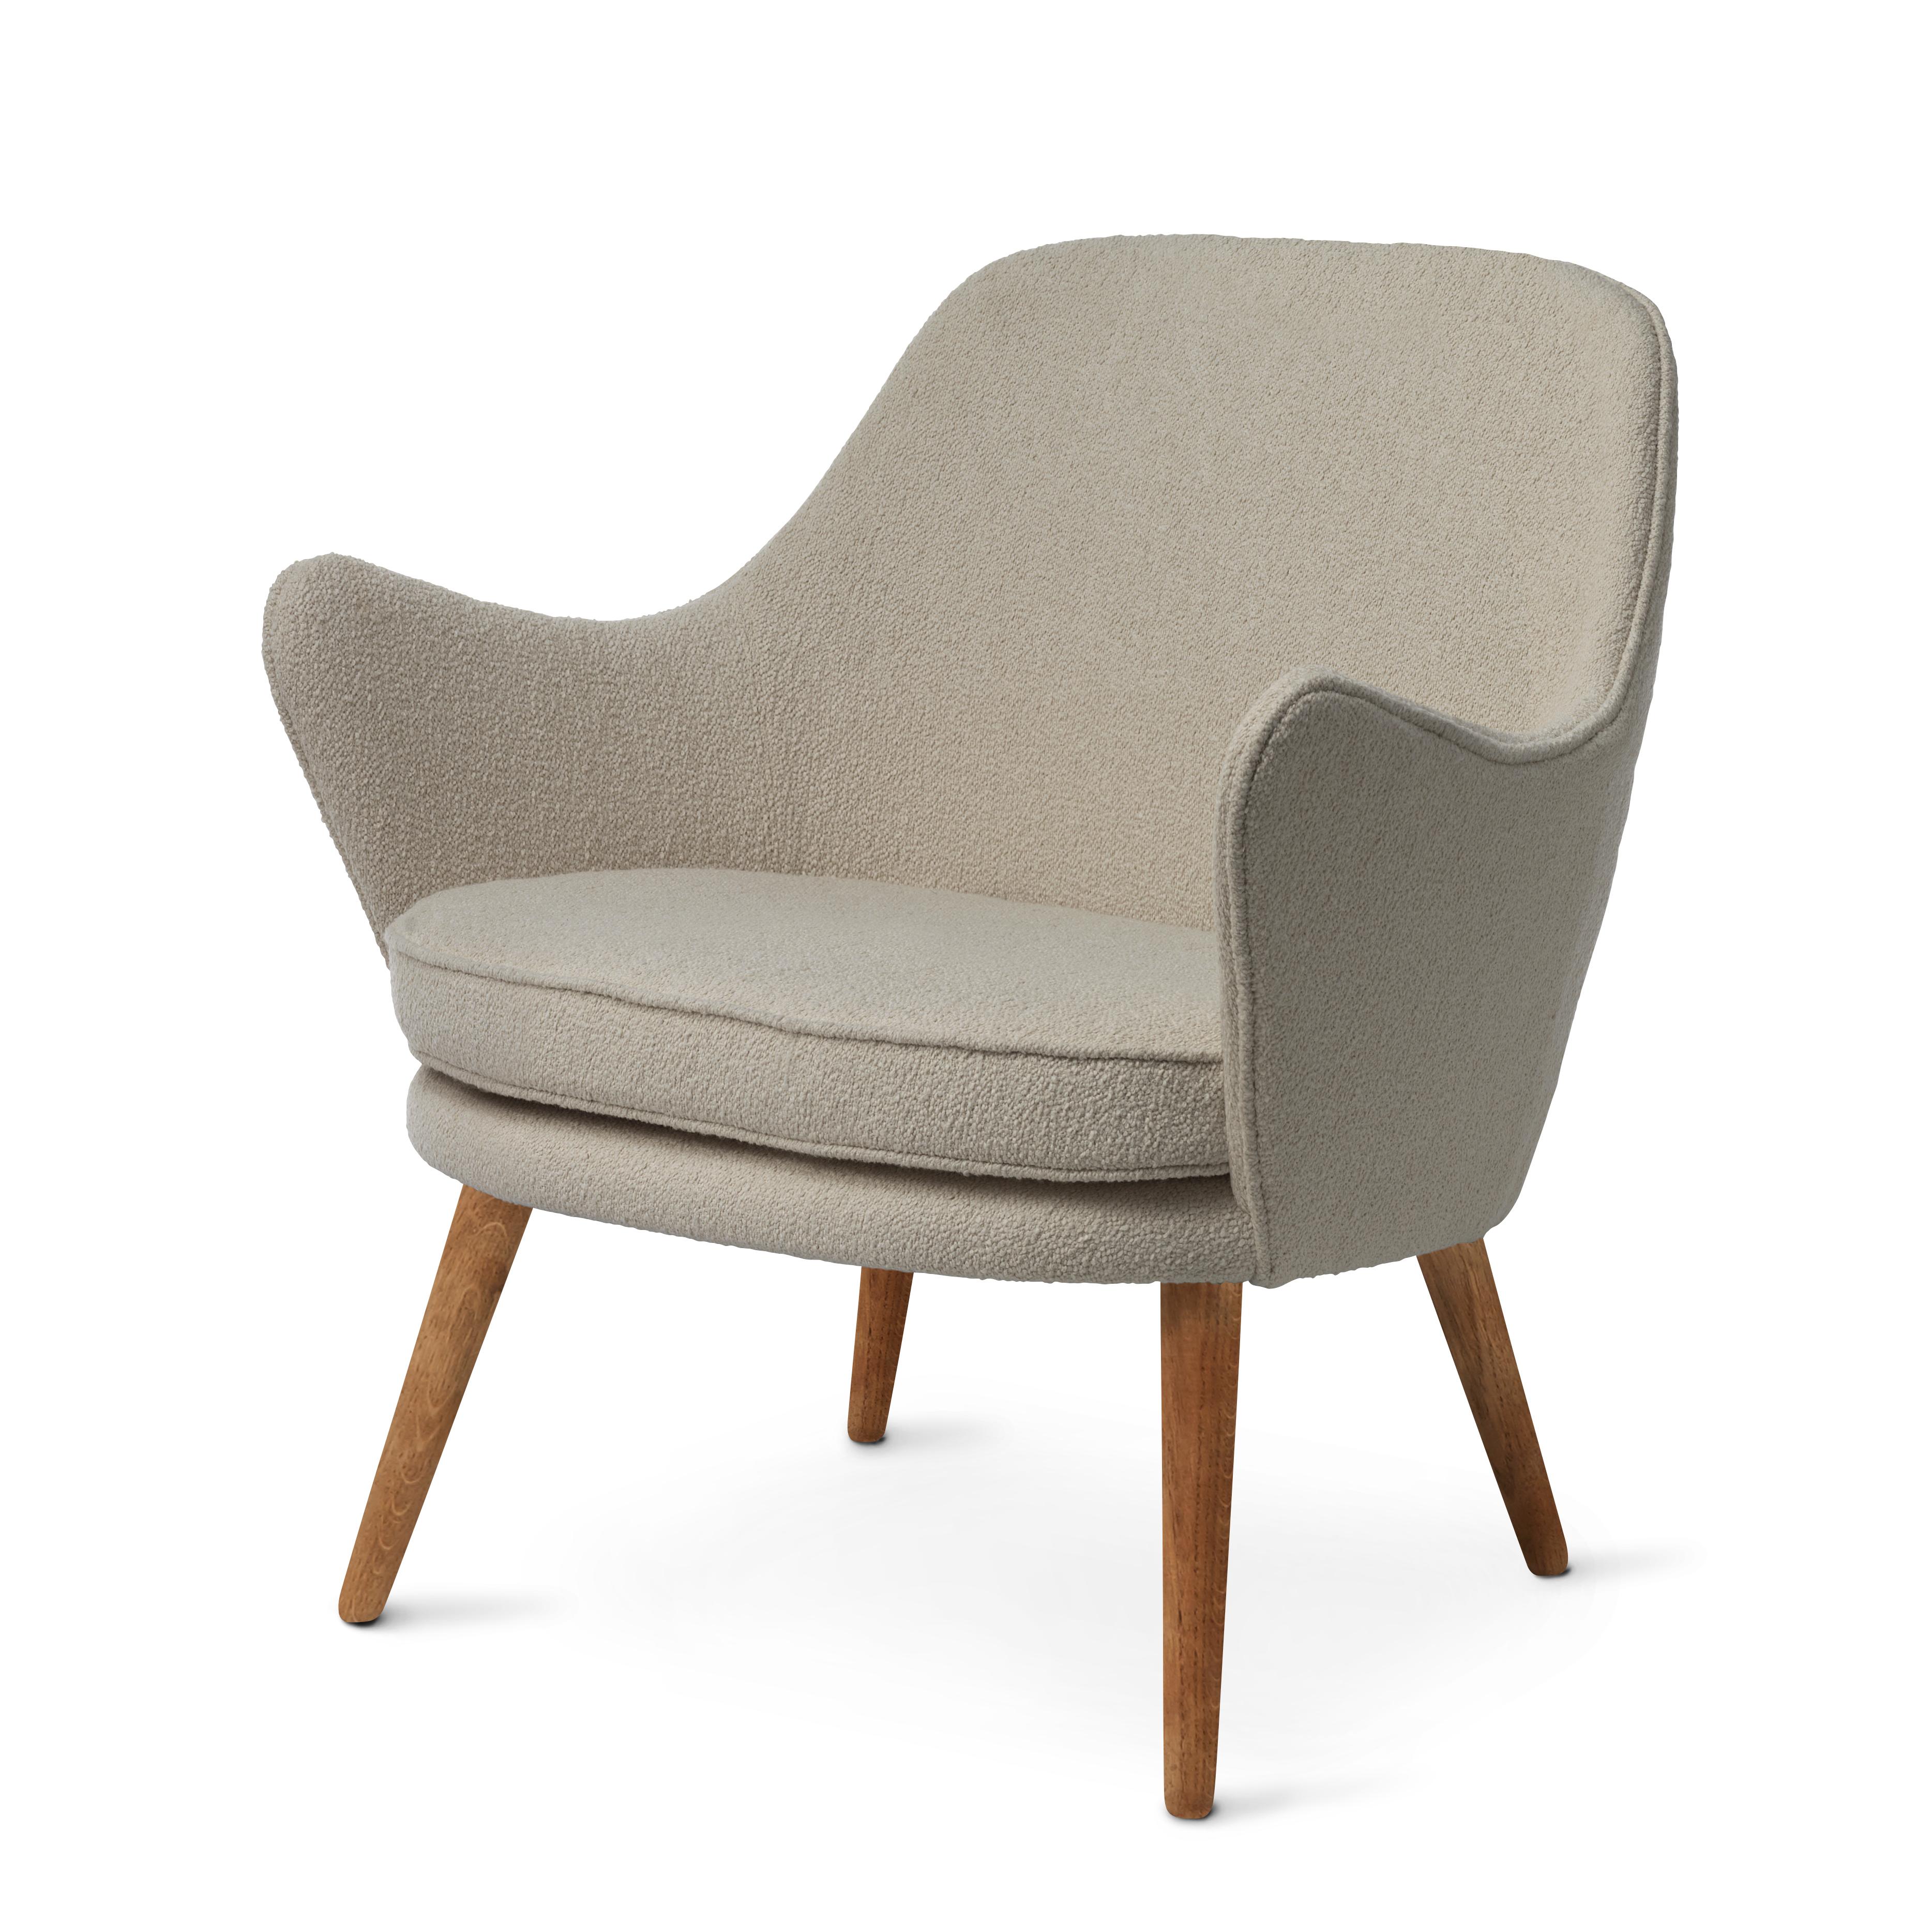 For Sale: Gray (Barnum 2) Dwell Lounge Chair, by Hans Olsen from Warm Nordic 2